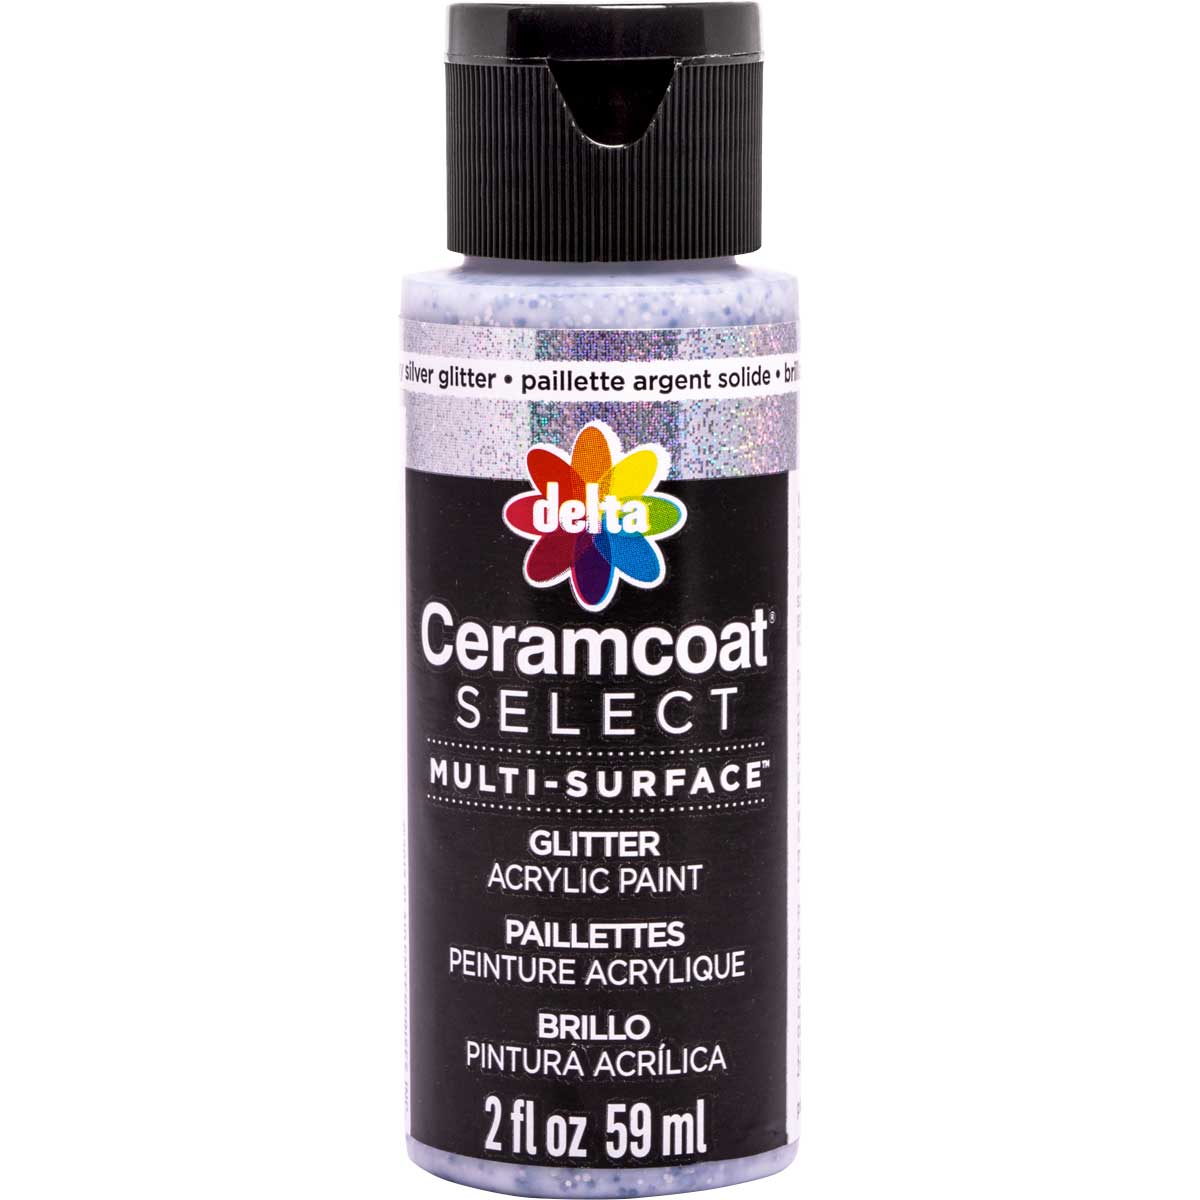 Delta Ceramcoat ® Select Multi-Surface Acrylic Paint - Glitter - Chunky Silver, 2 oz. - 04116